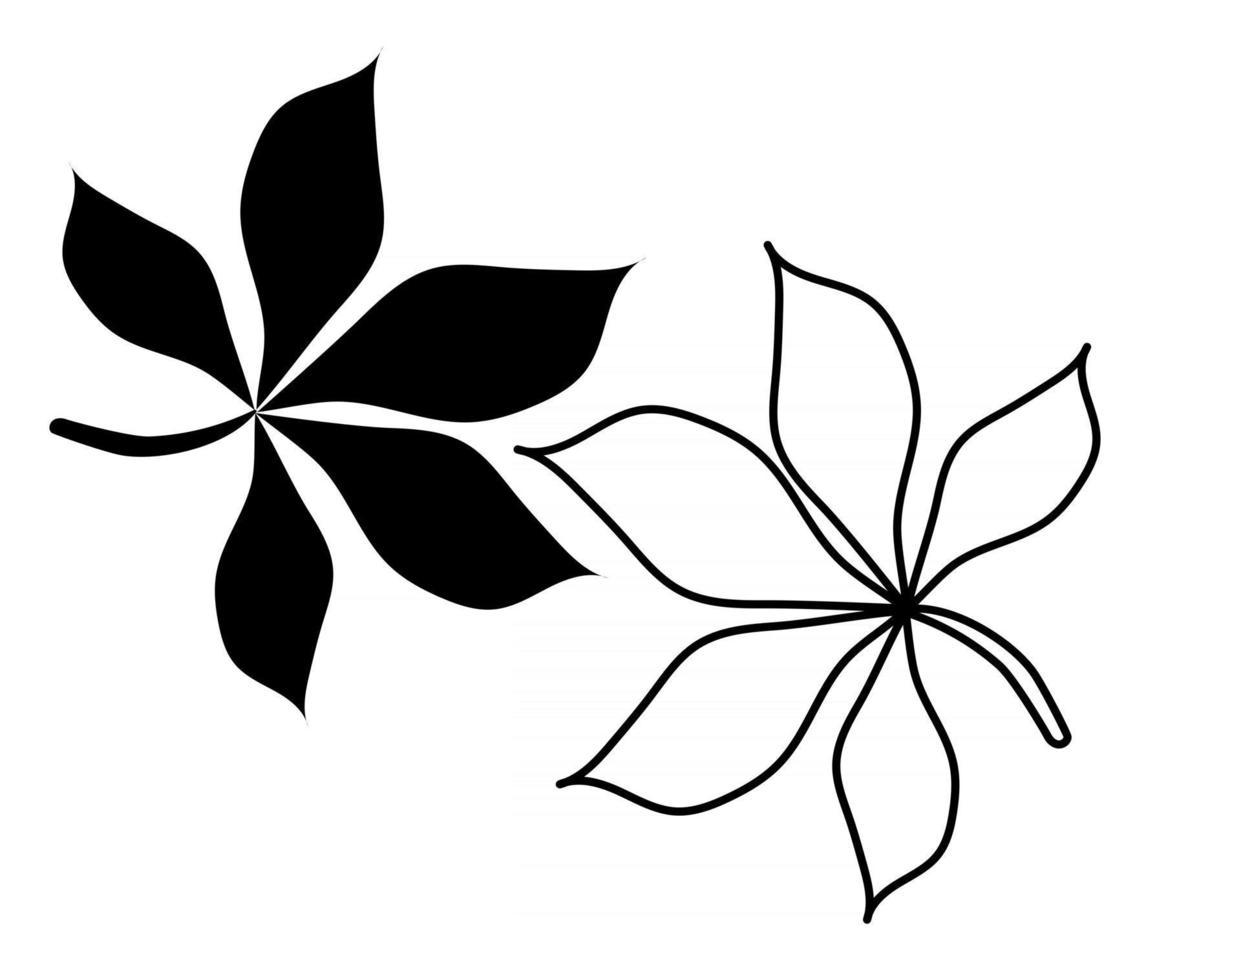 outline and silhouette of a leaf of a chestnut tree vector